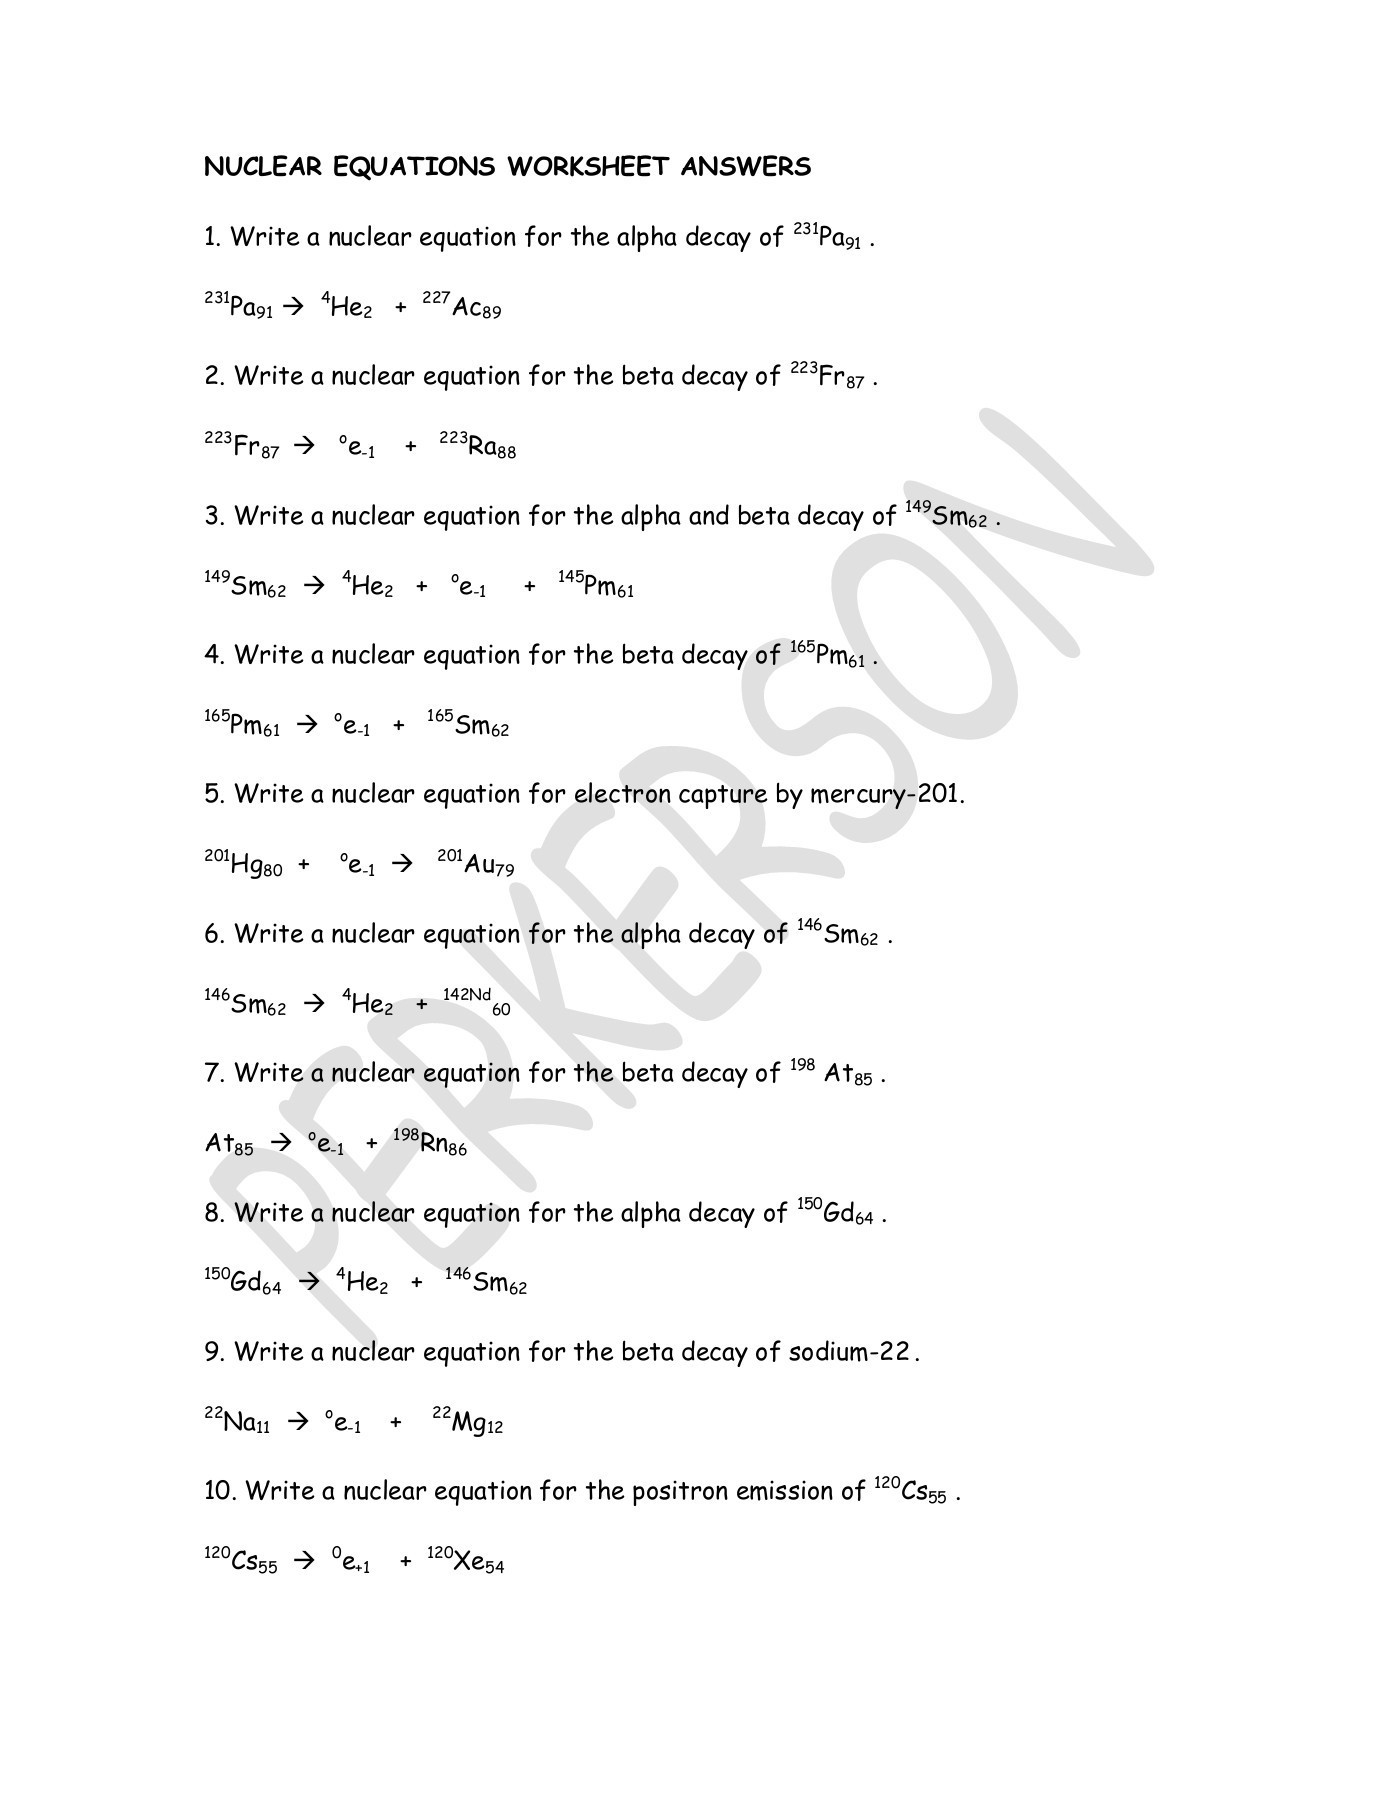 Nuclear Chemistry Worksheet Answers Nuclear Equations Worksheet Answers Typepad Pages 1 3